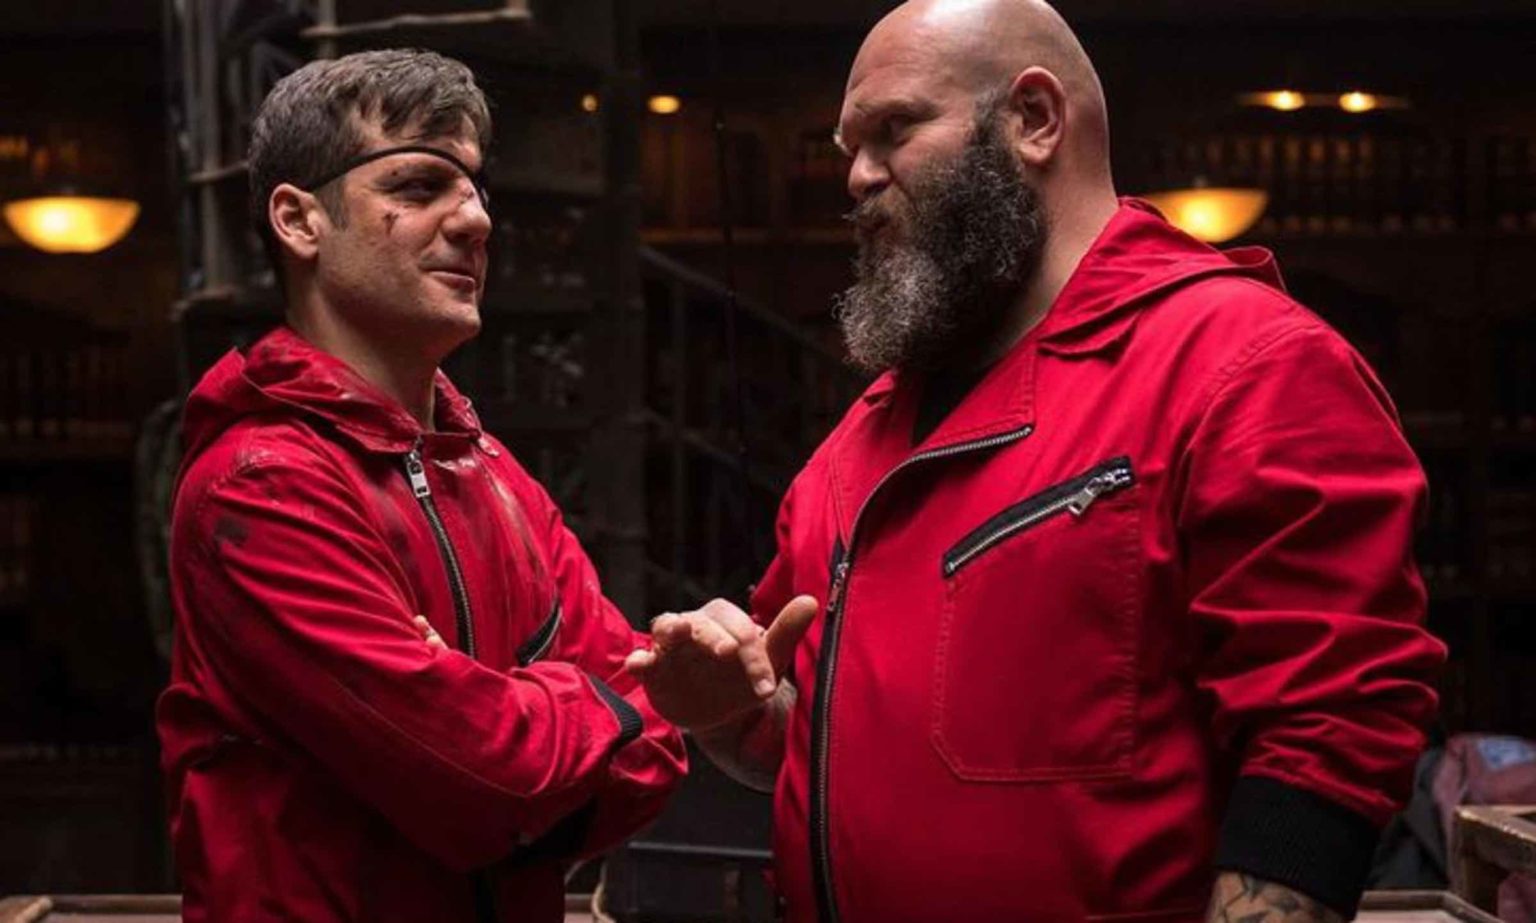 Where there’s a crime, there’s always someone who is the villain. Let's rank our villains from 'Money Heist' from worst to best.